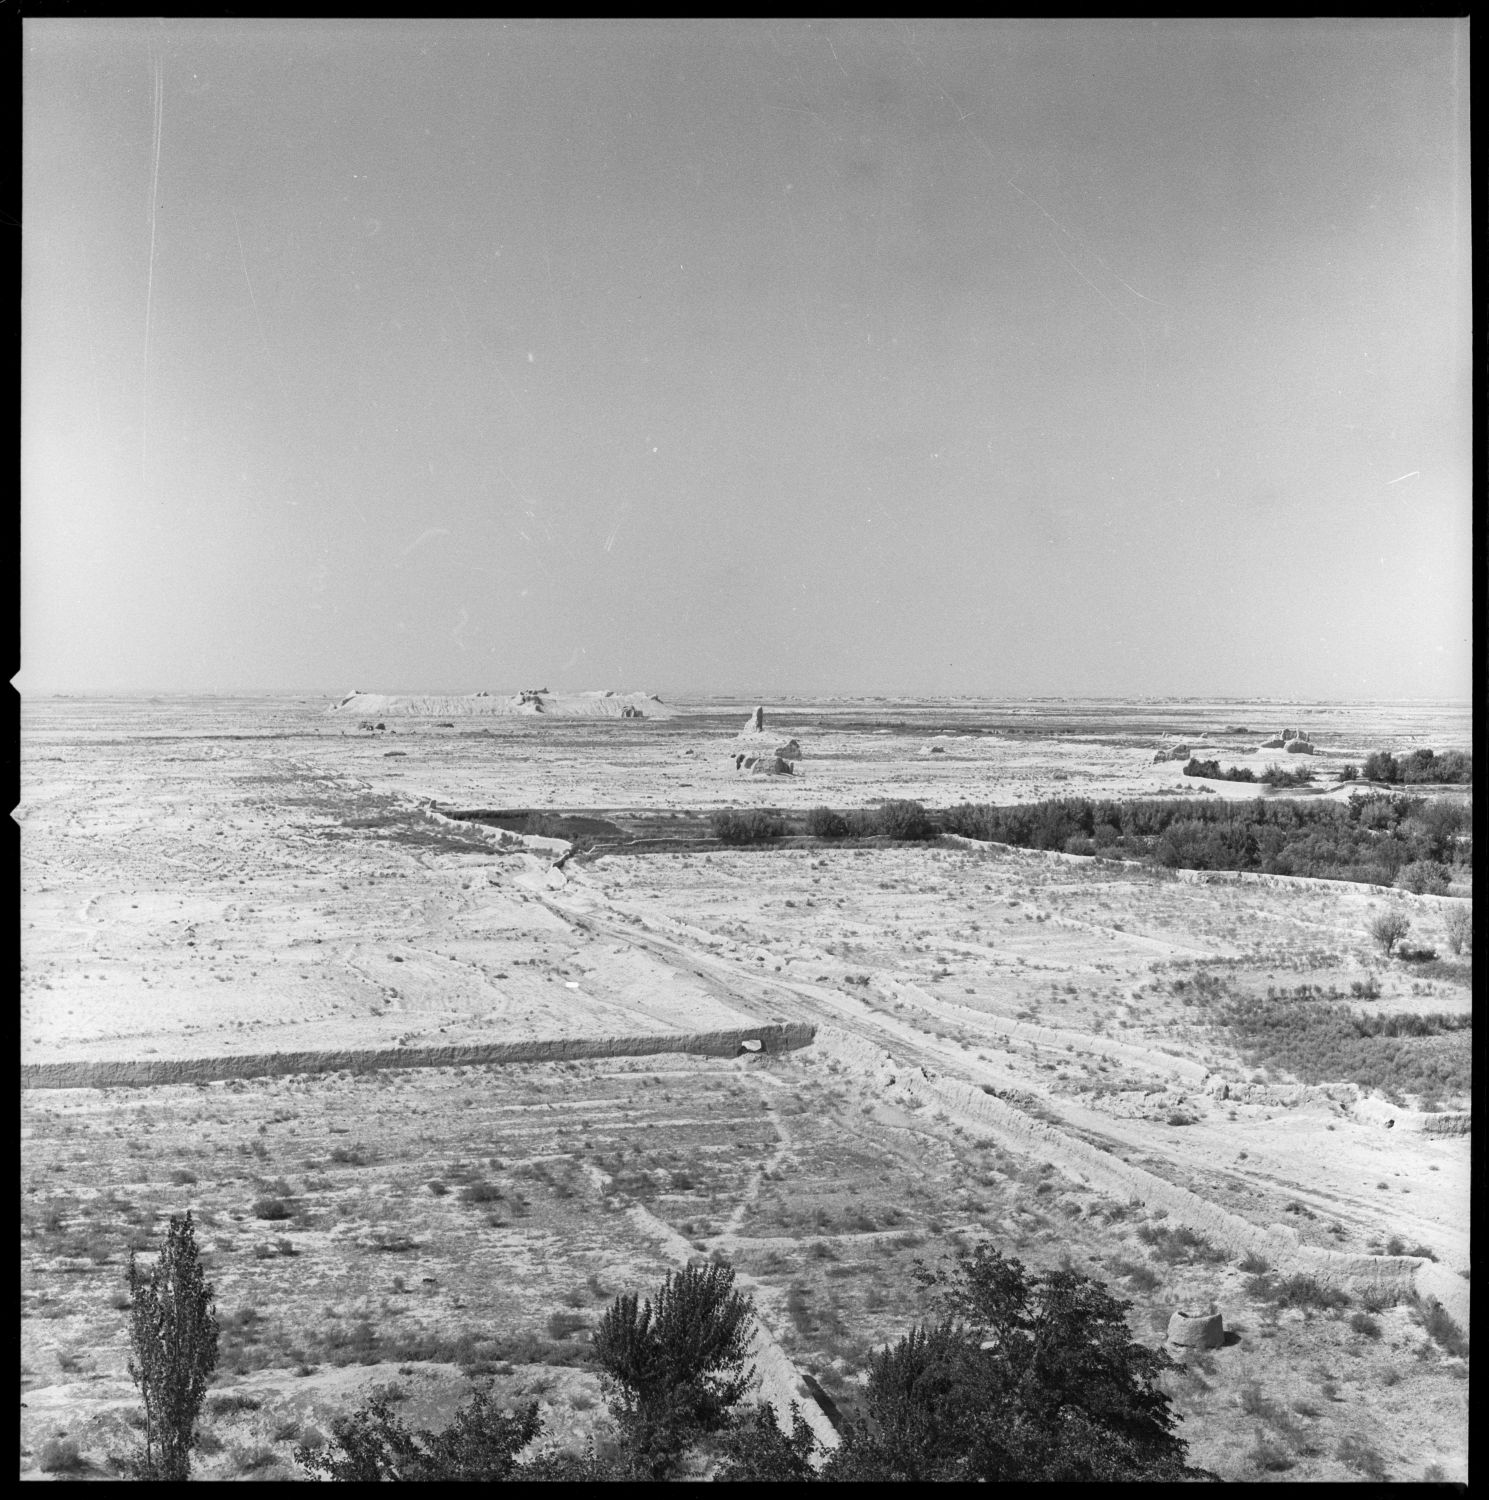 View of the surrounding plains, facing northeast. The ruins of&nbsp;<a href="https://archnet.org/sites/19896" target="_blank" data-bypass="true">Zadiyan Kafir Qal'a</a>&nbsp;are visible in background.